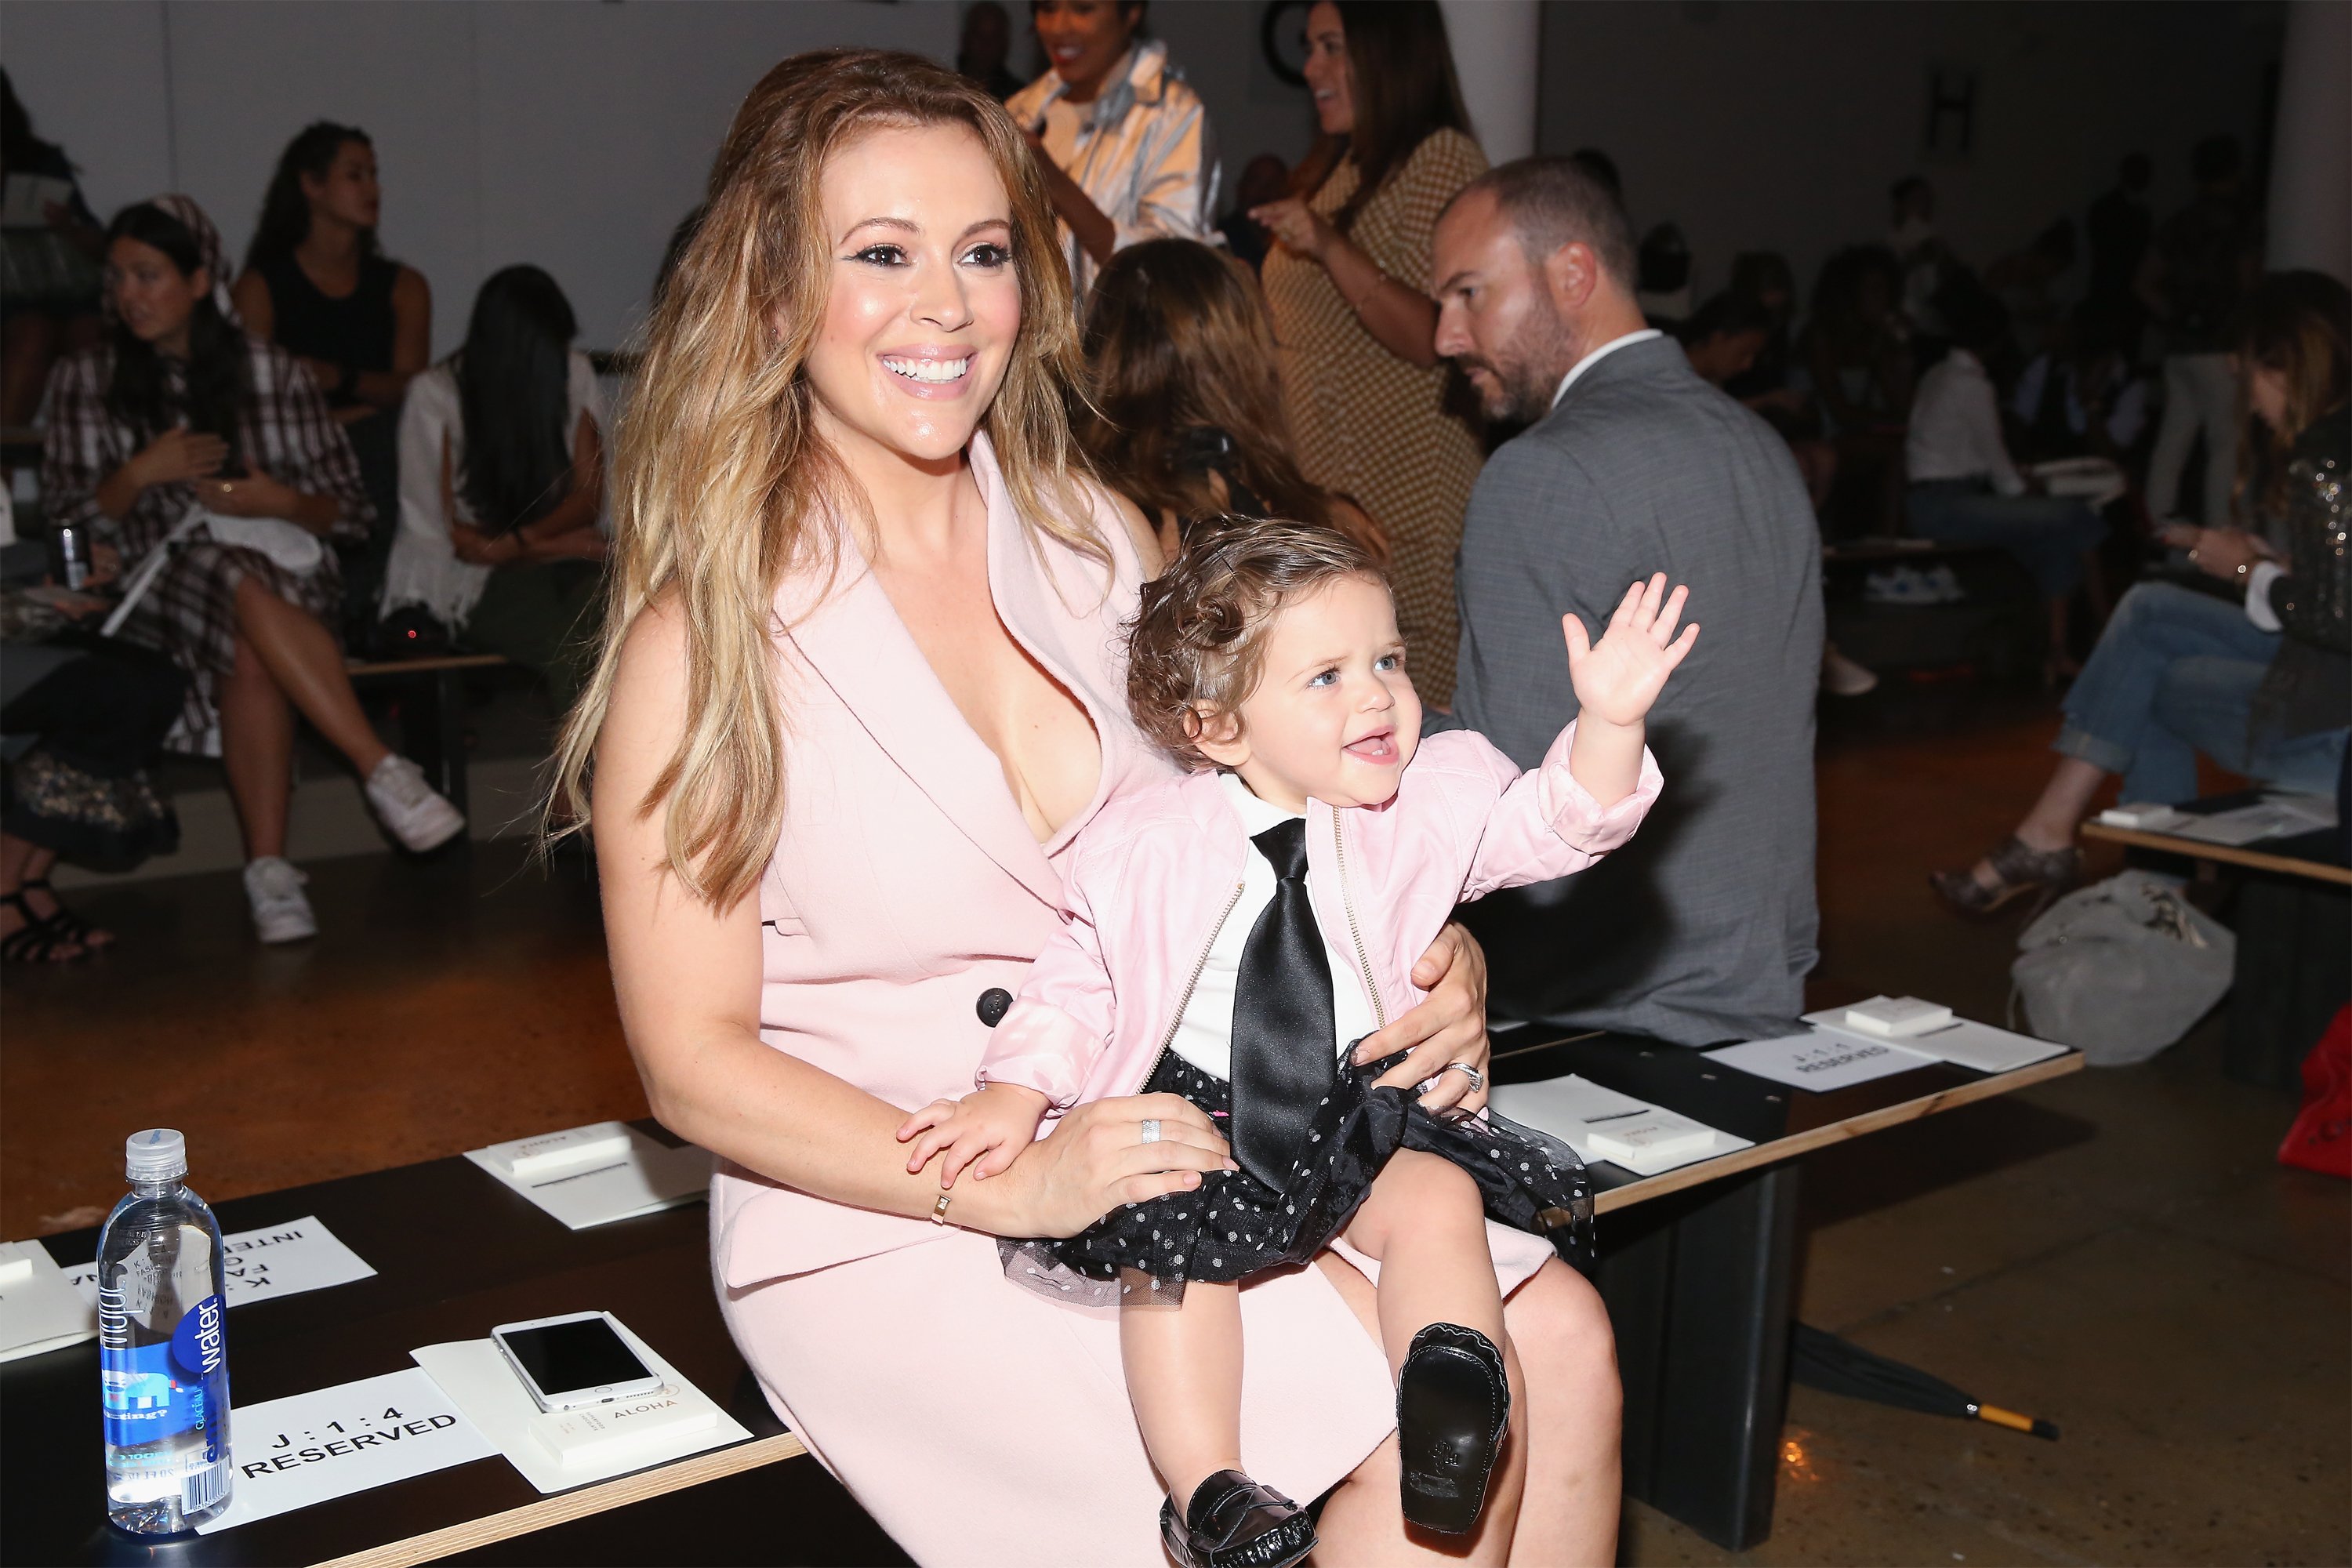  Actress Alyssa Milano and daughter Elizabella Milano attend the Marissa Webb fashion show during Spring 2016 MADE Fashion Week at Milk Studios on September 10, 2015 in New York City. | Source: Getty Images